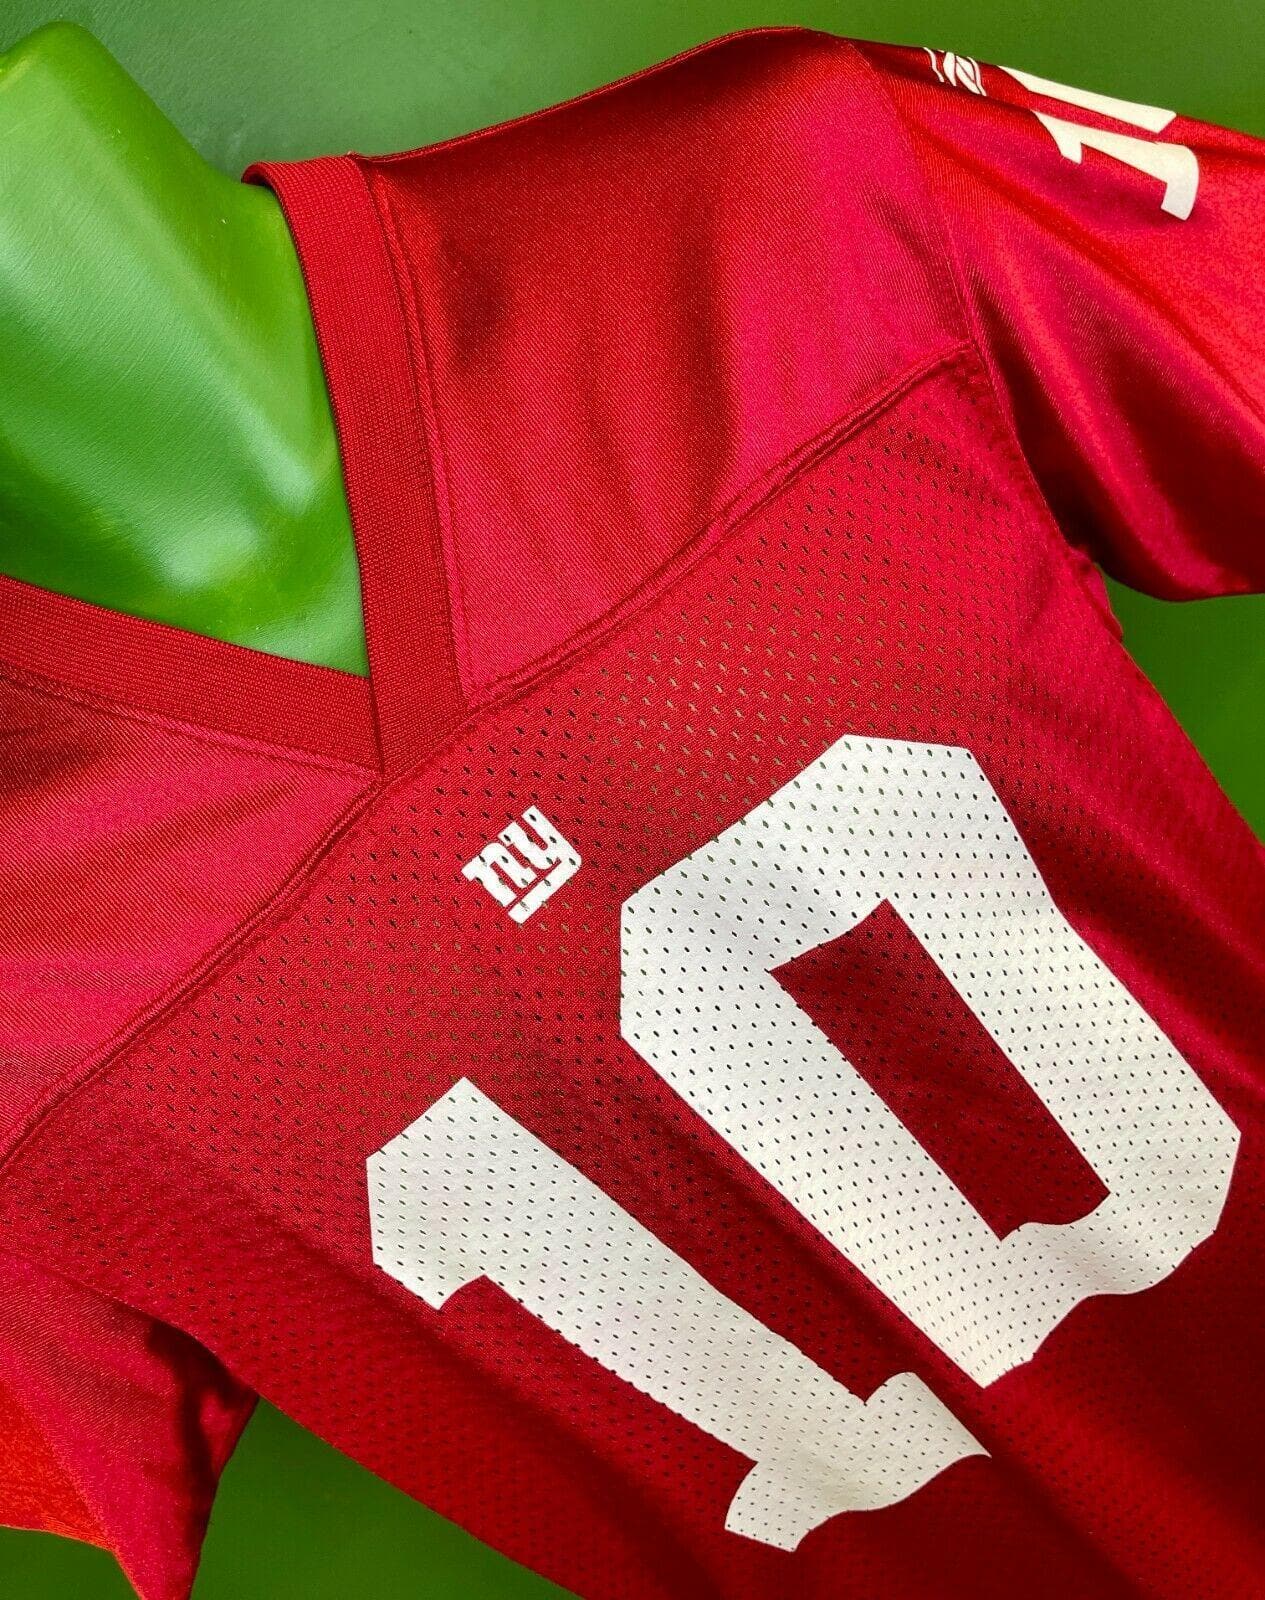 Eli Manning # 10 New York Giants Football Red Jersey Reebok Youth Large  14-16